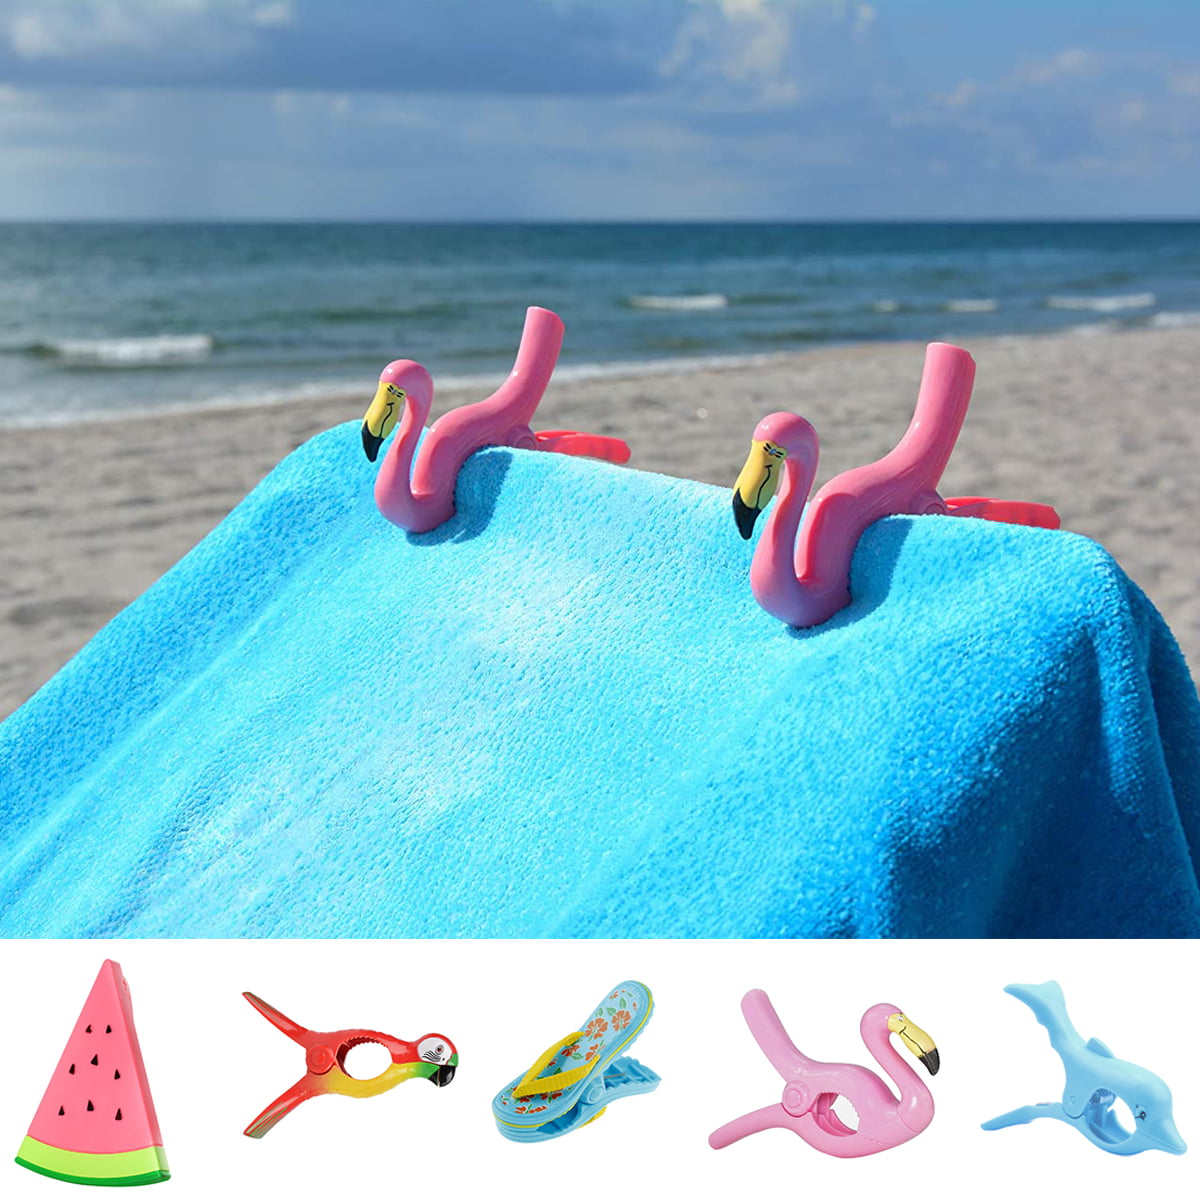 Plastic Beach Chair Clips Towel Clip Details about   MCOMCE Beach Towel Clips for Pool Chairs 